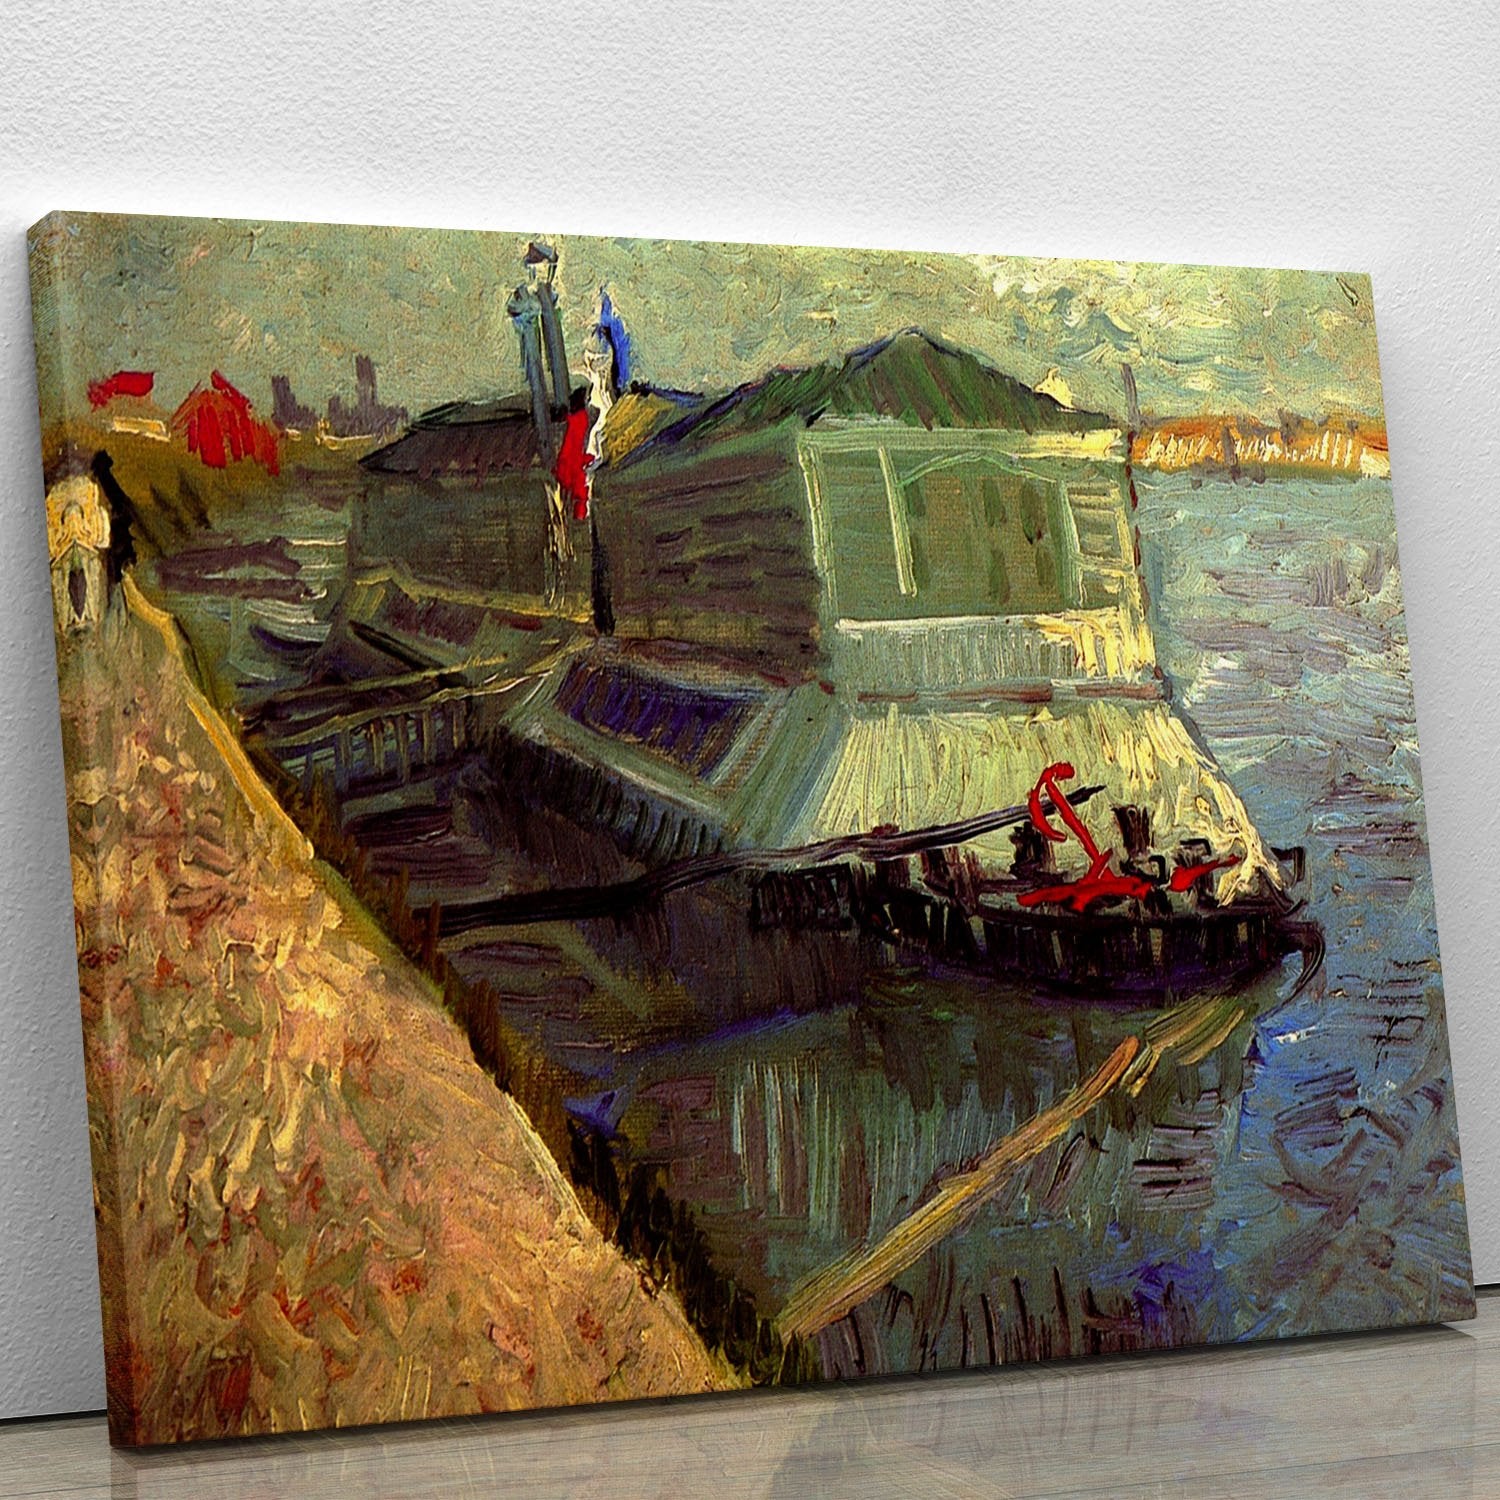 Bathing Float on the Seine at Asniere by Van Gogh Canvas Print or Poster